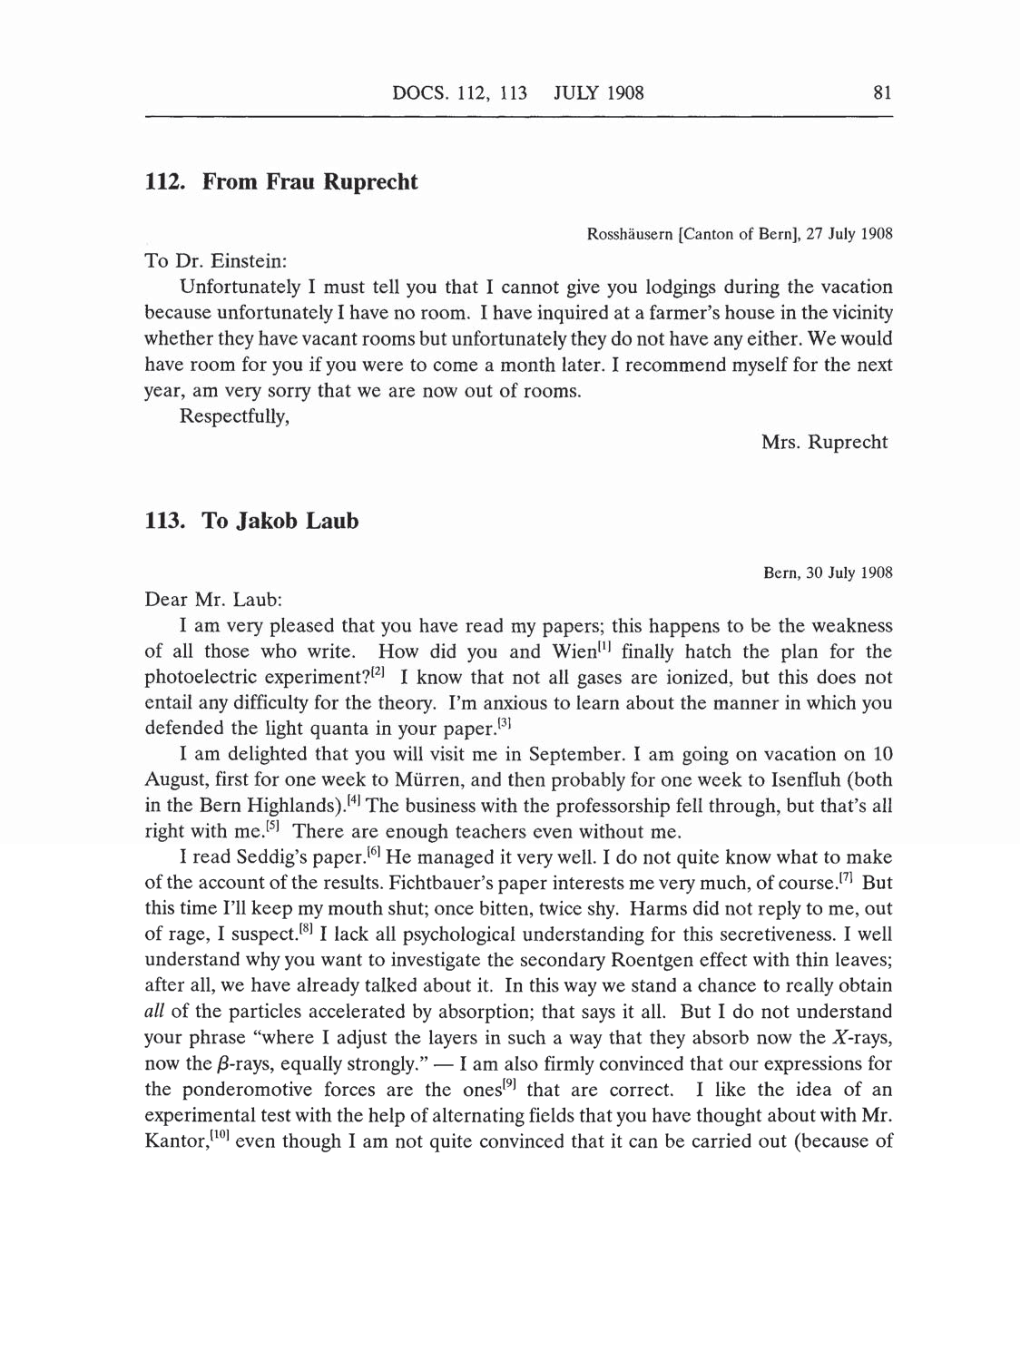 Volume 5: The Swiss Years: Correspondence, 1902-1914 (English translation supplement) page 81